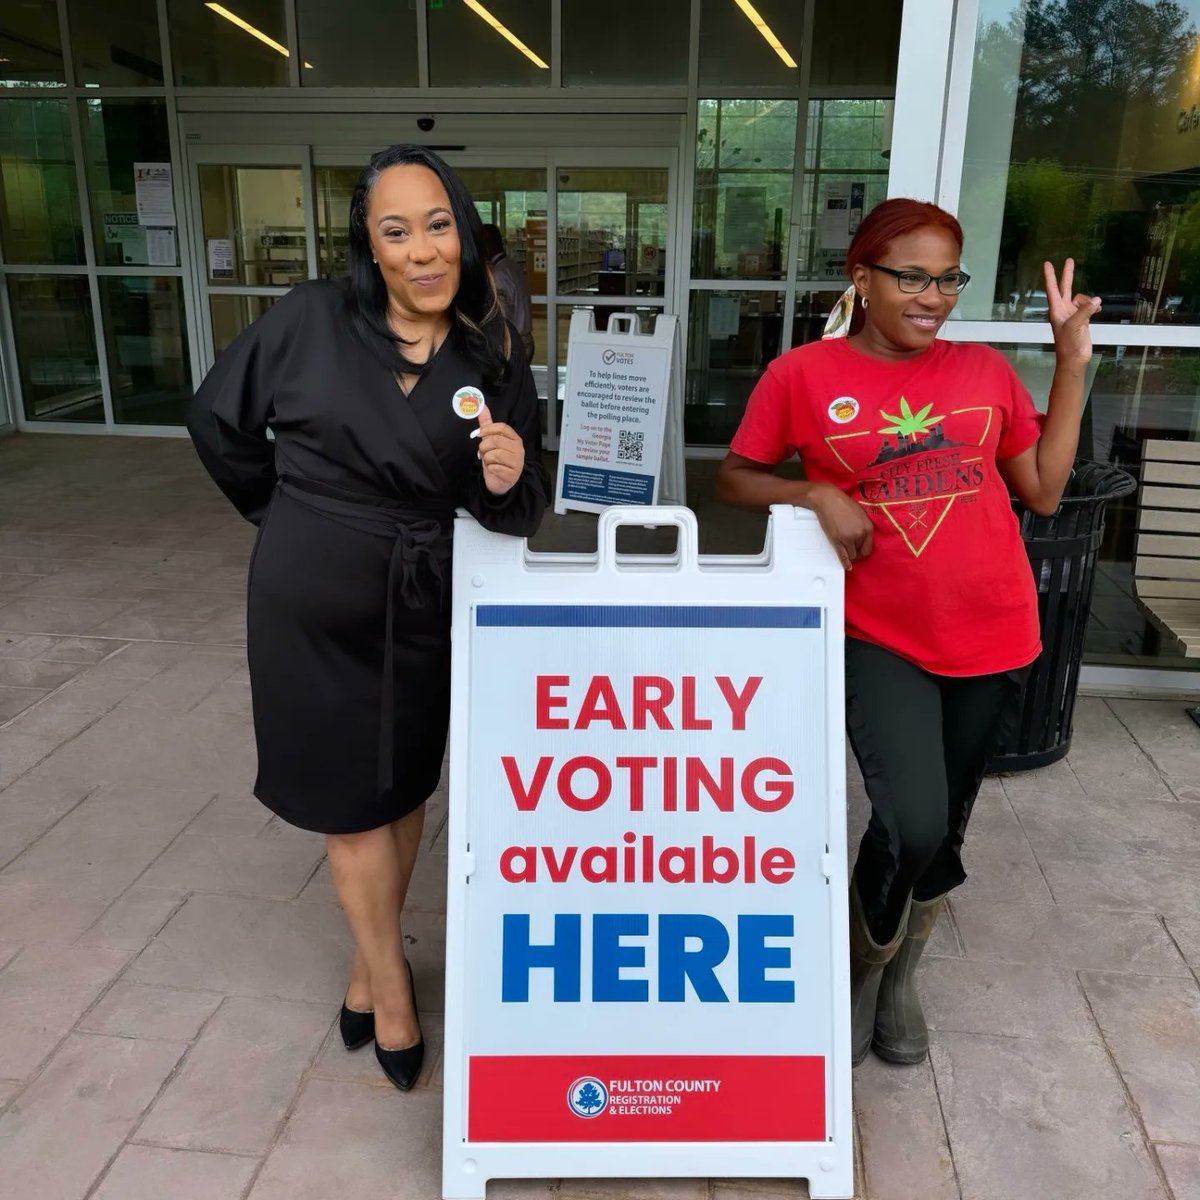 Today's the last Saturday for early voting in #FultonCounty! Don't miss your chance to vote early and shape our community's future. Re-elect Fani Willis for District Attorney. Find a polling location: mvp.sos.ga.gov/s/advanced-vot… #EarlyVoting #FaniWillis #FaniForDA #FaniForFulton